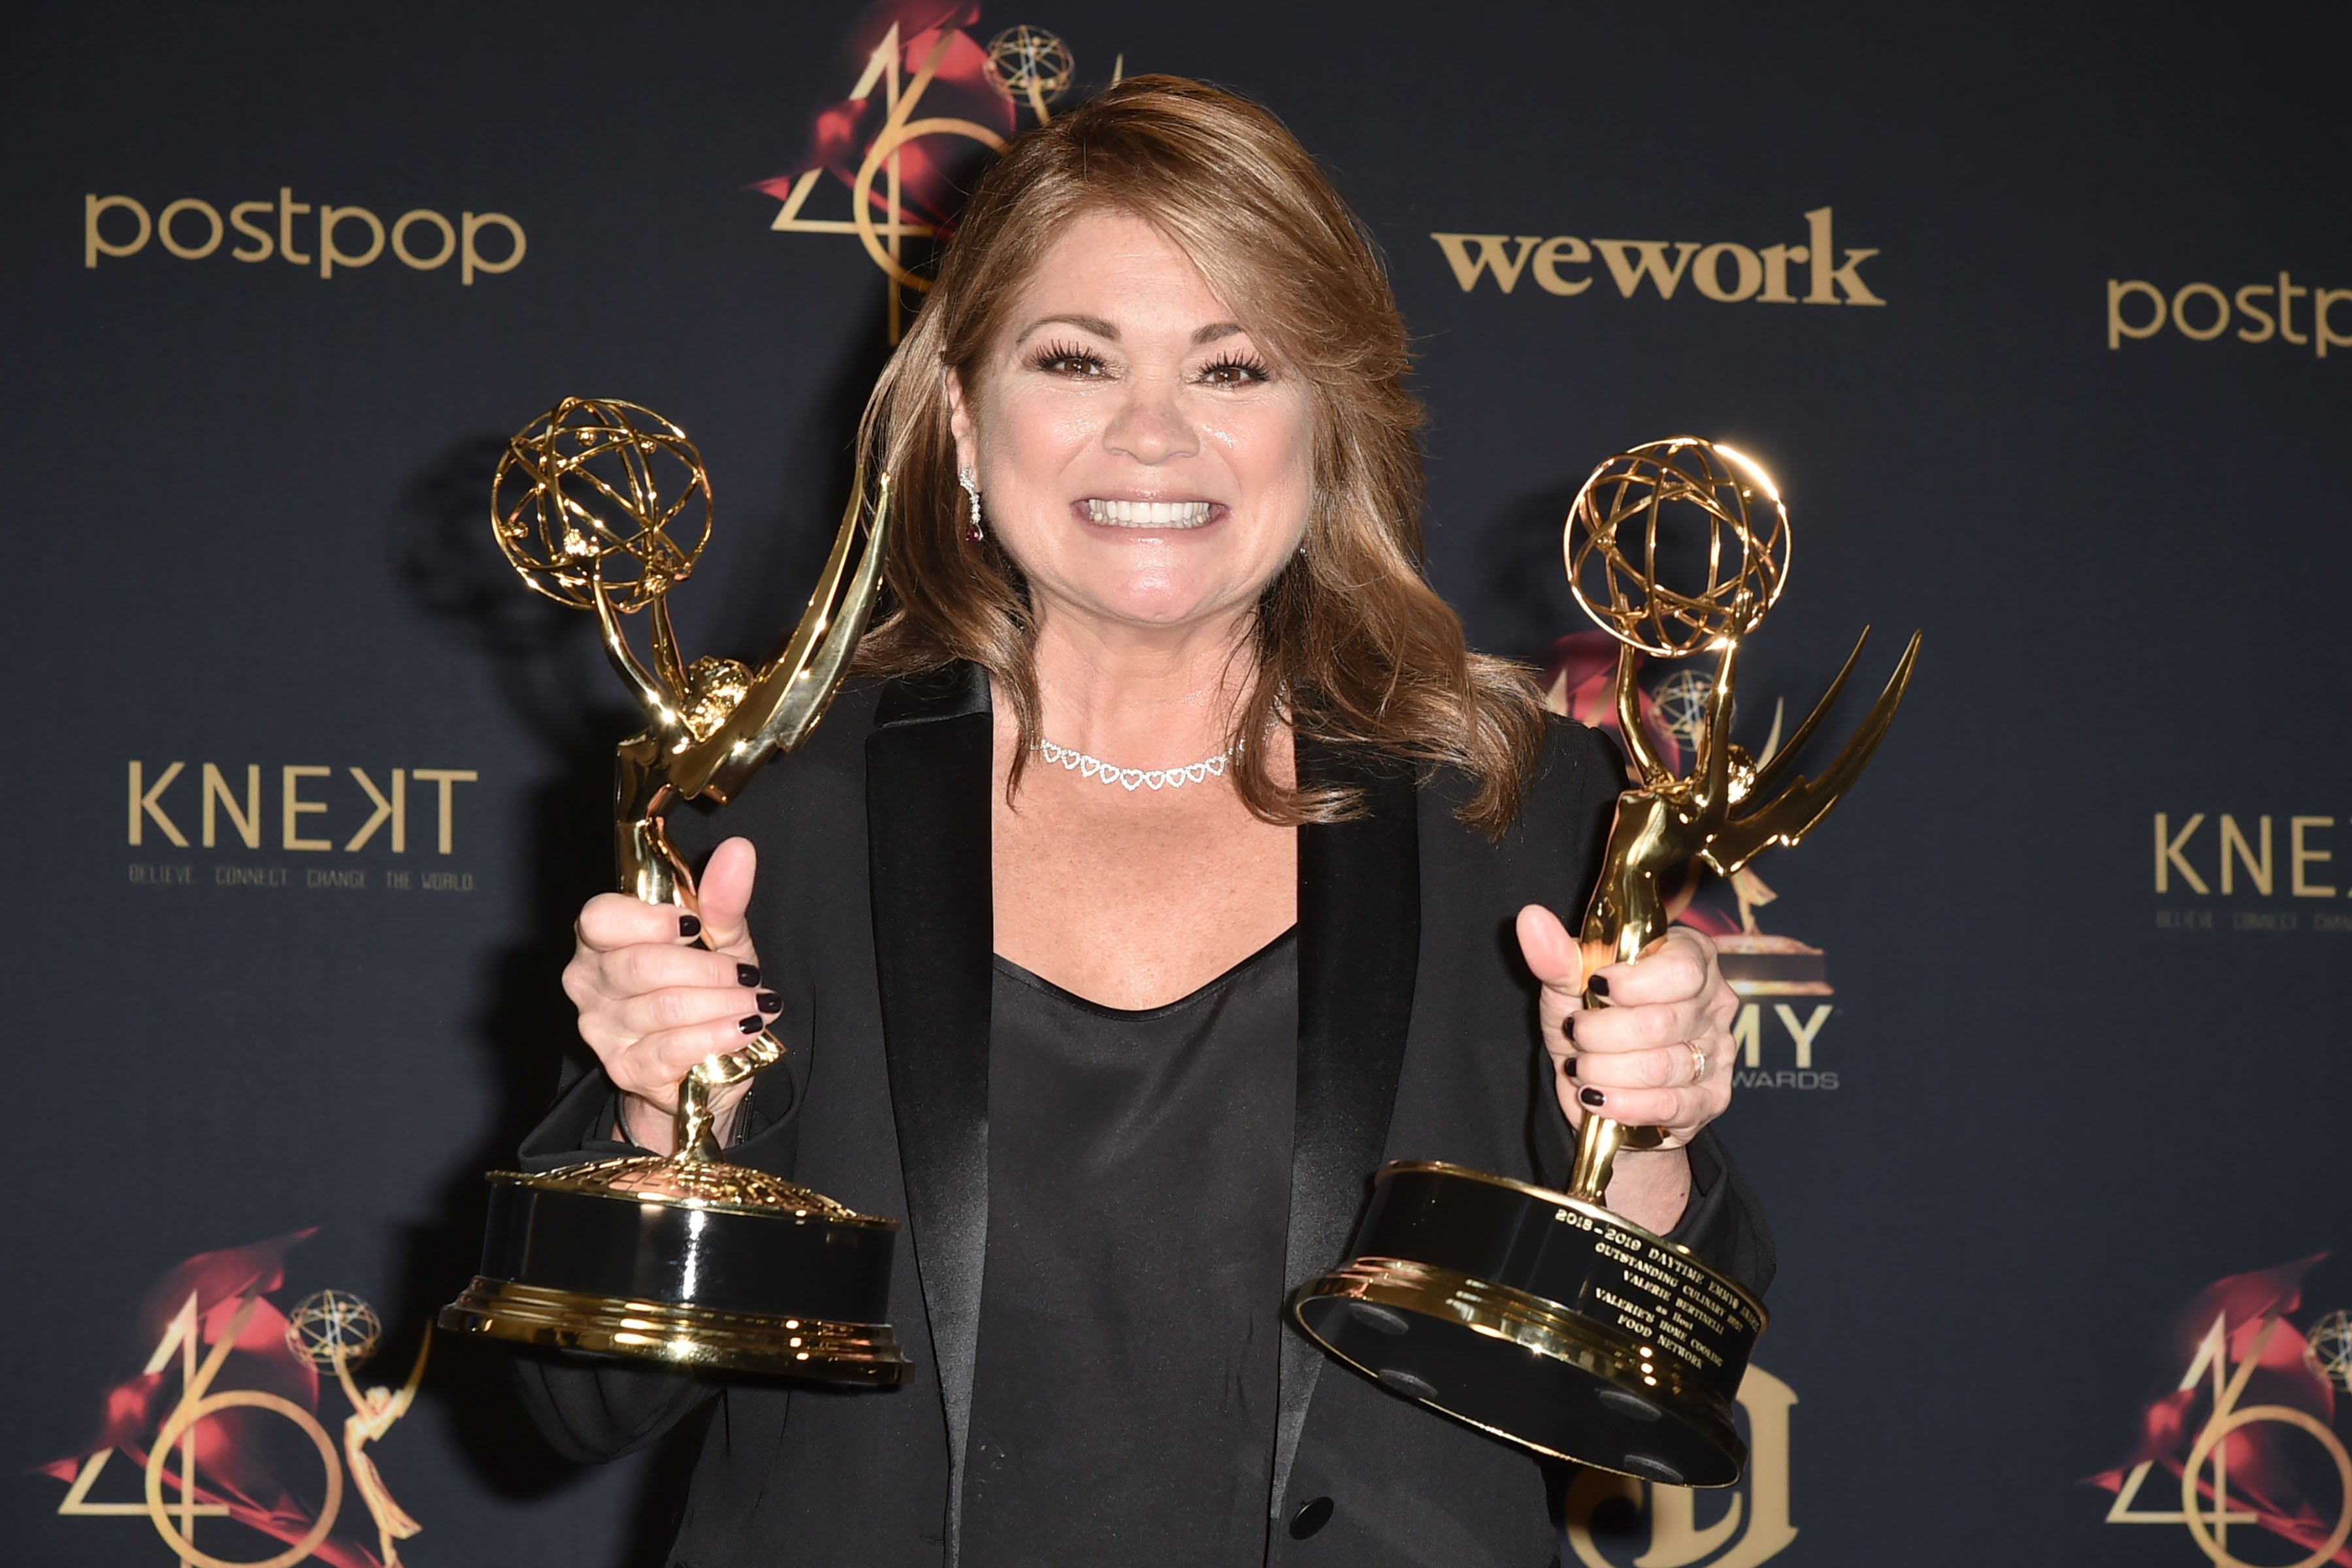 Food Network personality Valerie Bertinelli shows off her 2 Daytime Emmy awards in 2019.